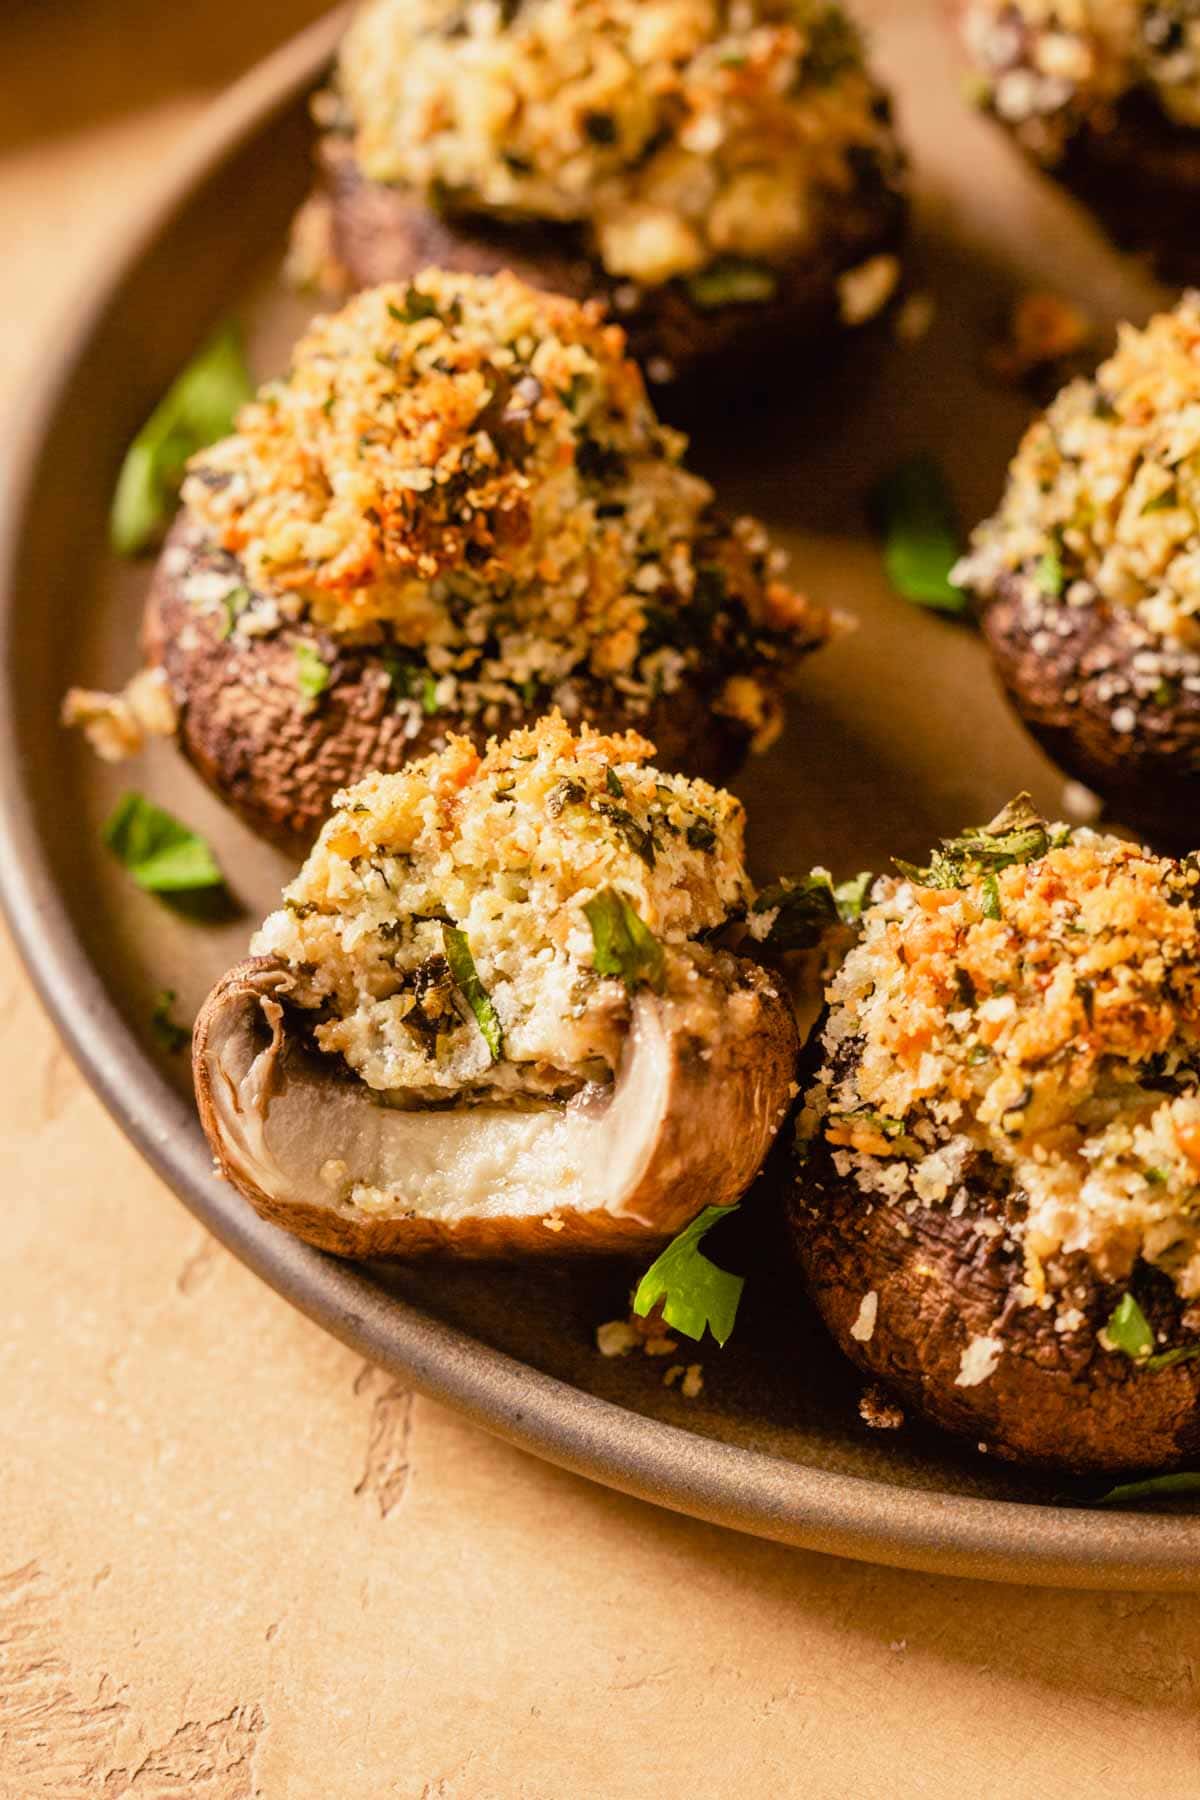 stuffed mushrooms topped with breadcrumbs on a brown plate. One mushroom with a bite taken out of it